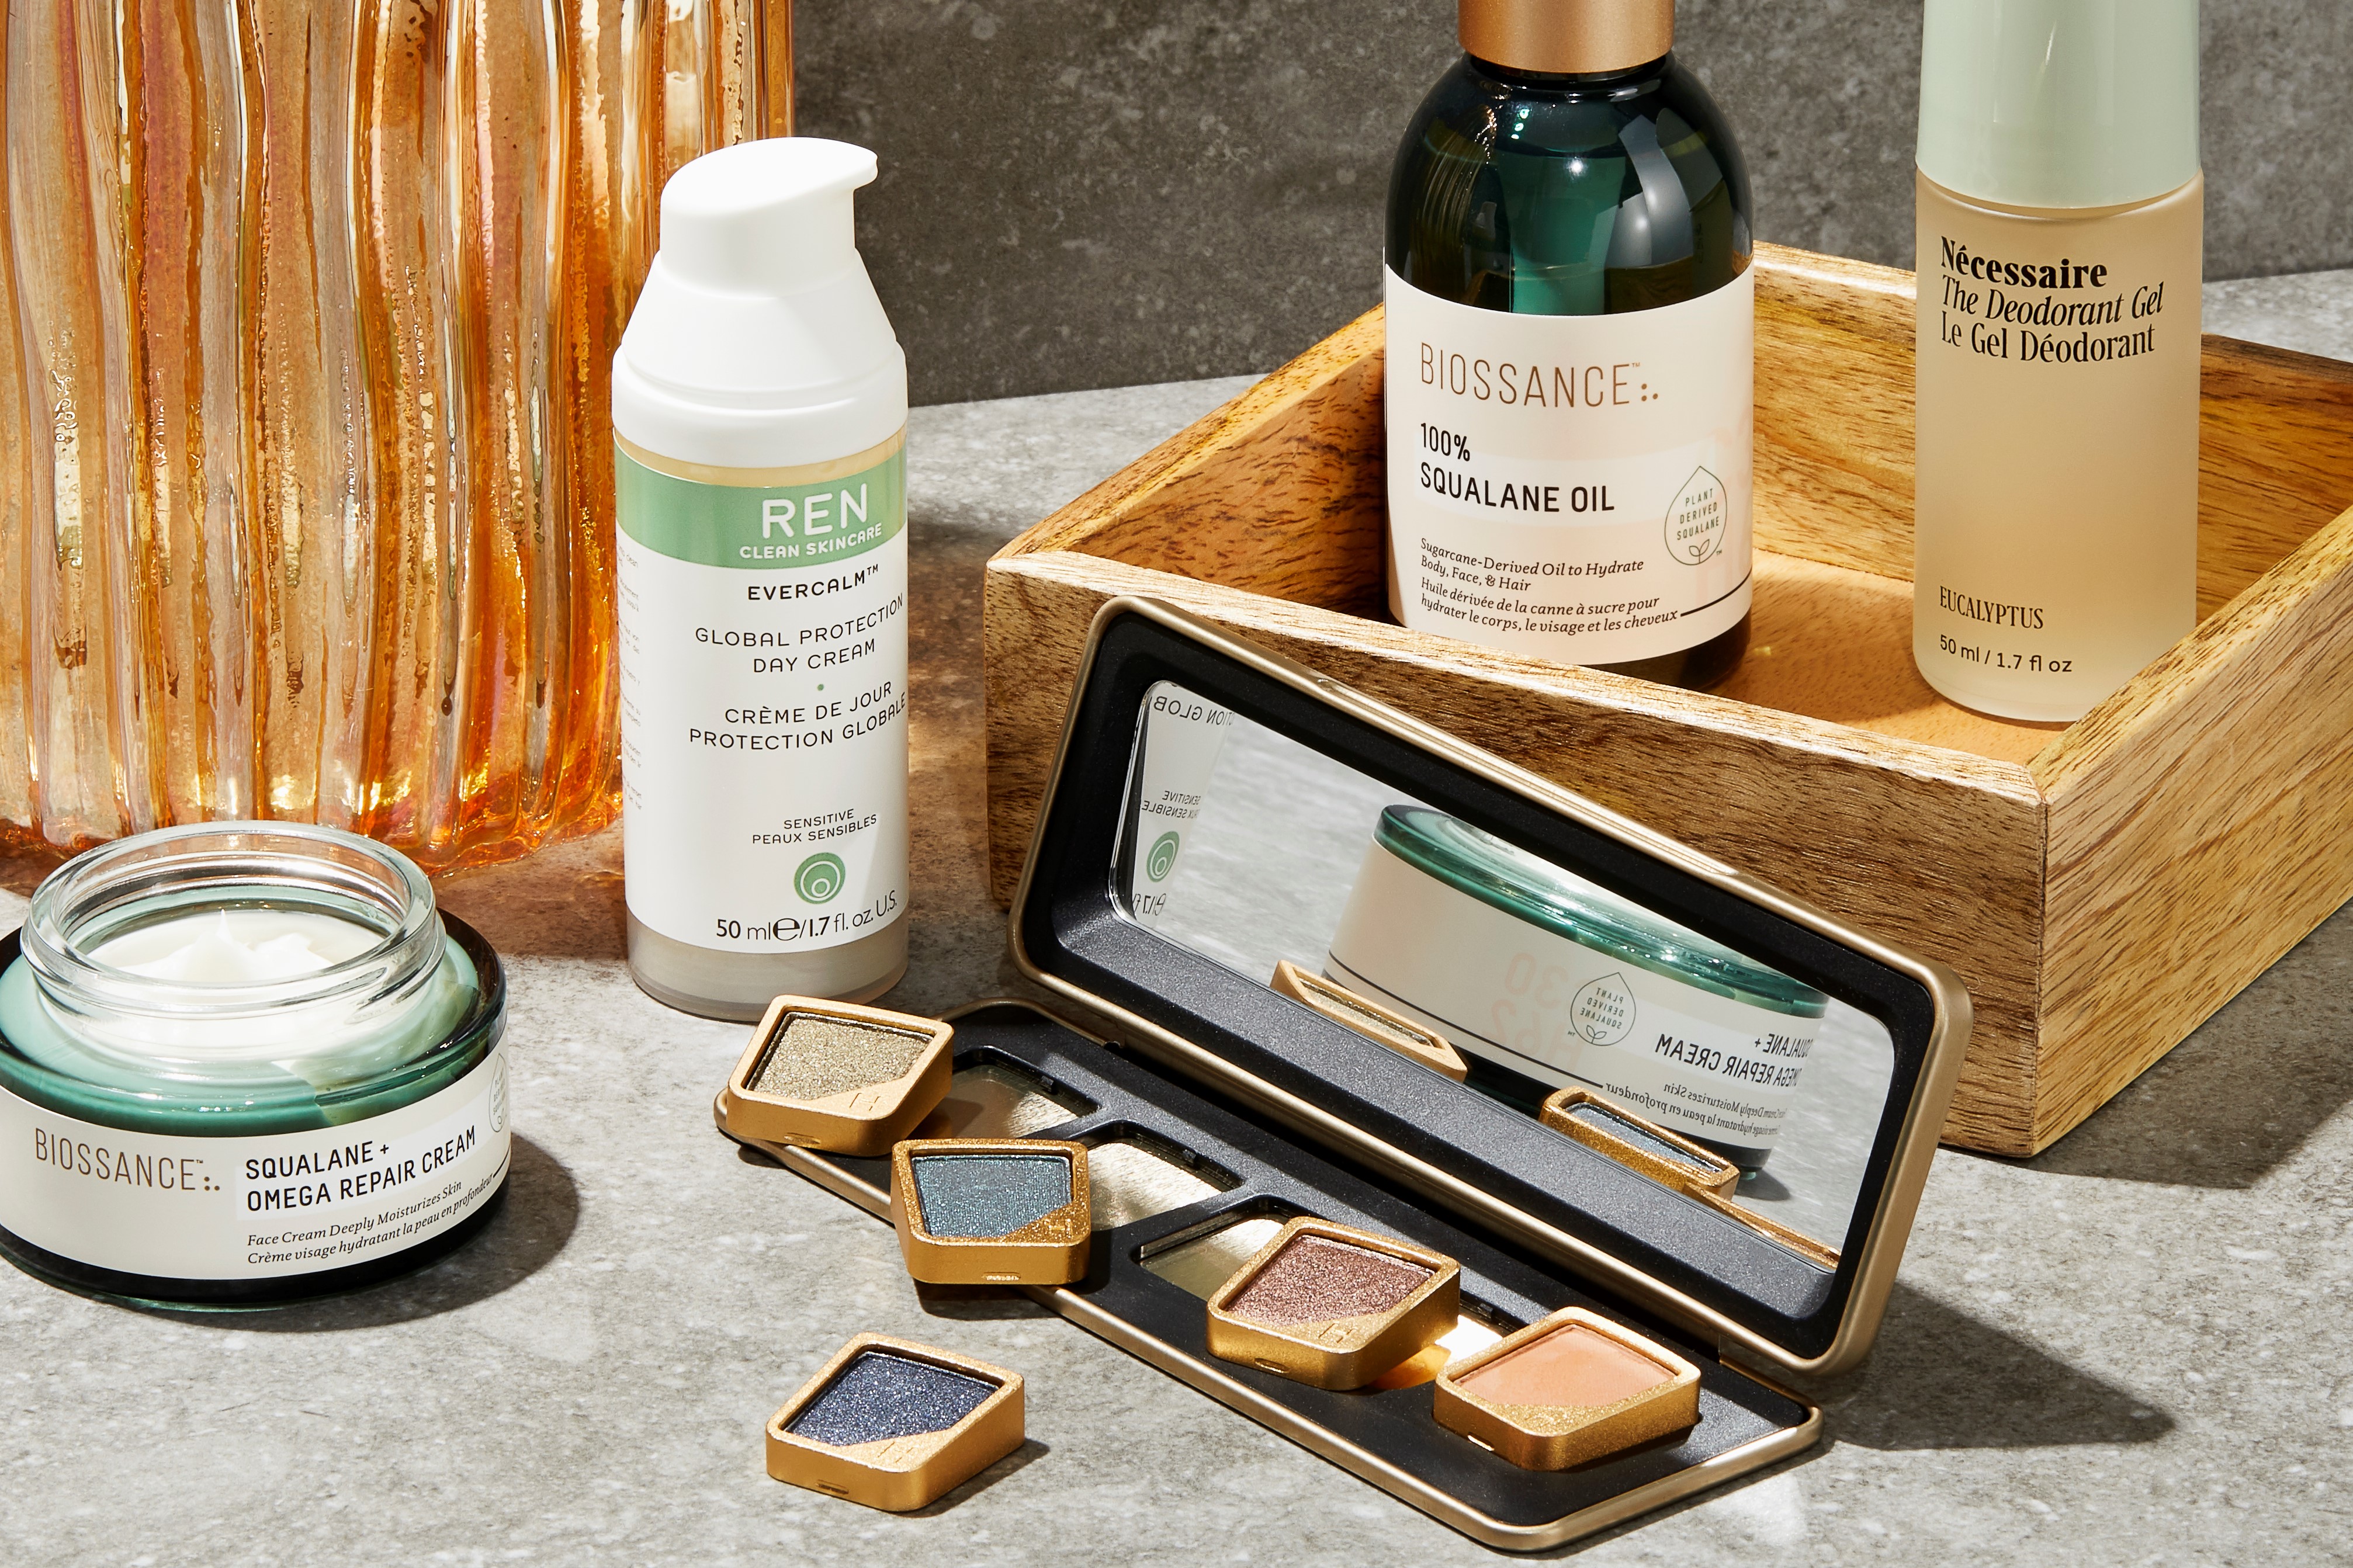 8 Of The Best Eco-Friendly Makeup and Skincare Brands